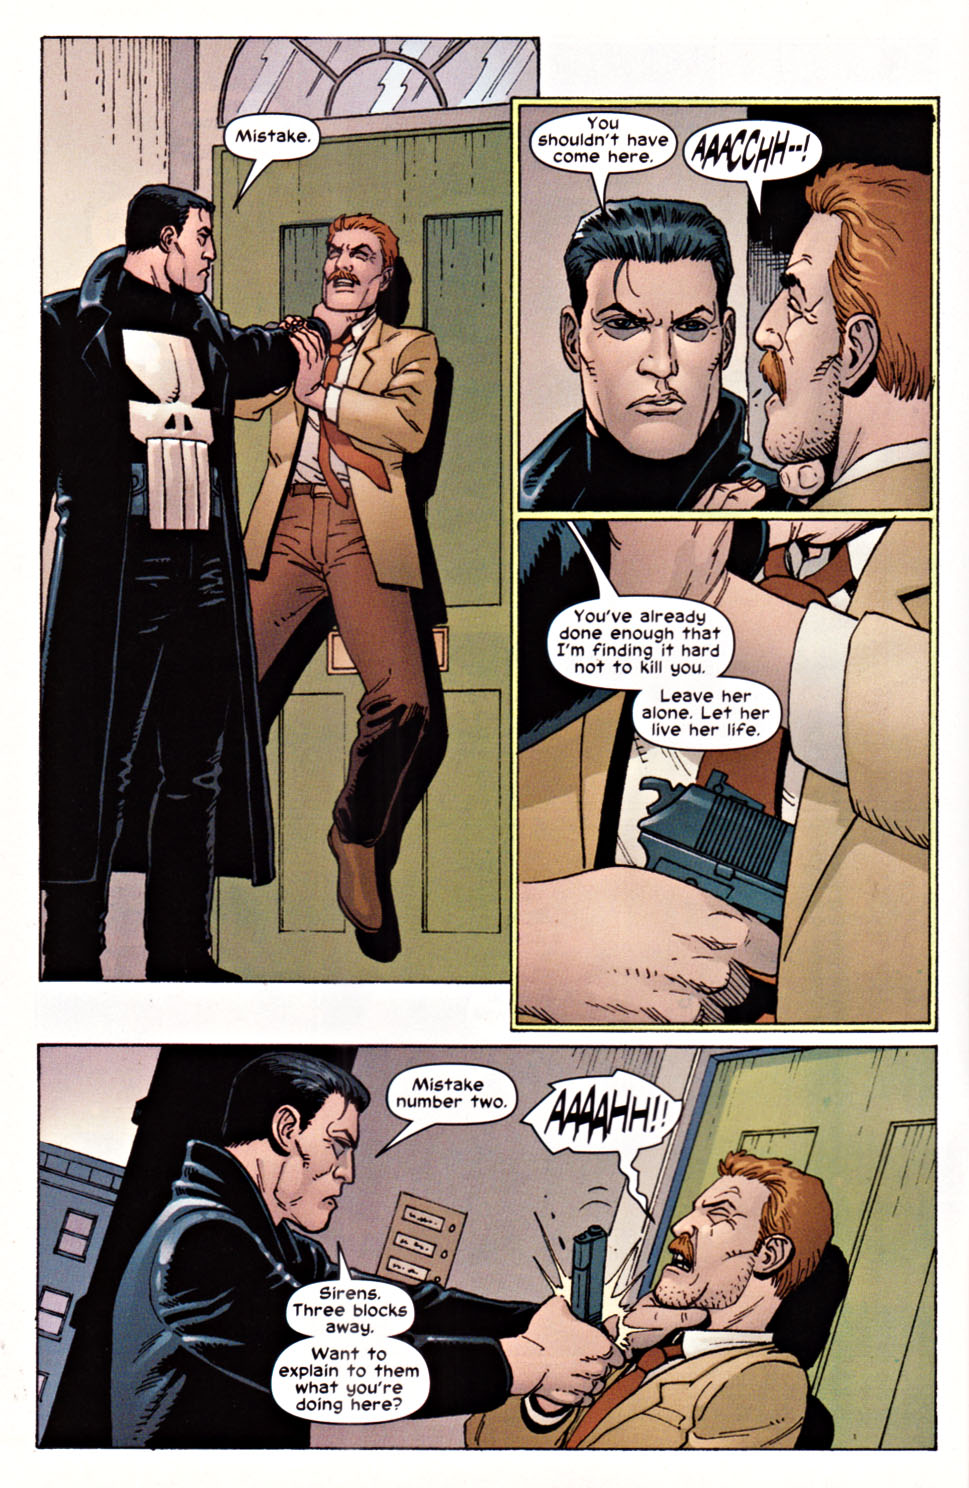 The Punisher (2001) issue 22 - Brotherhood #03 - Page 3